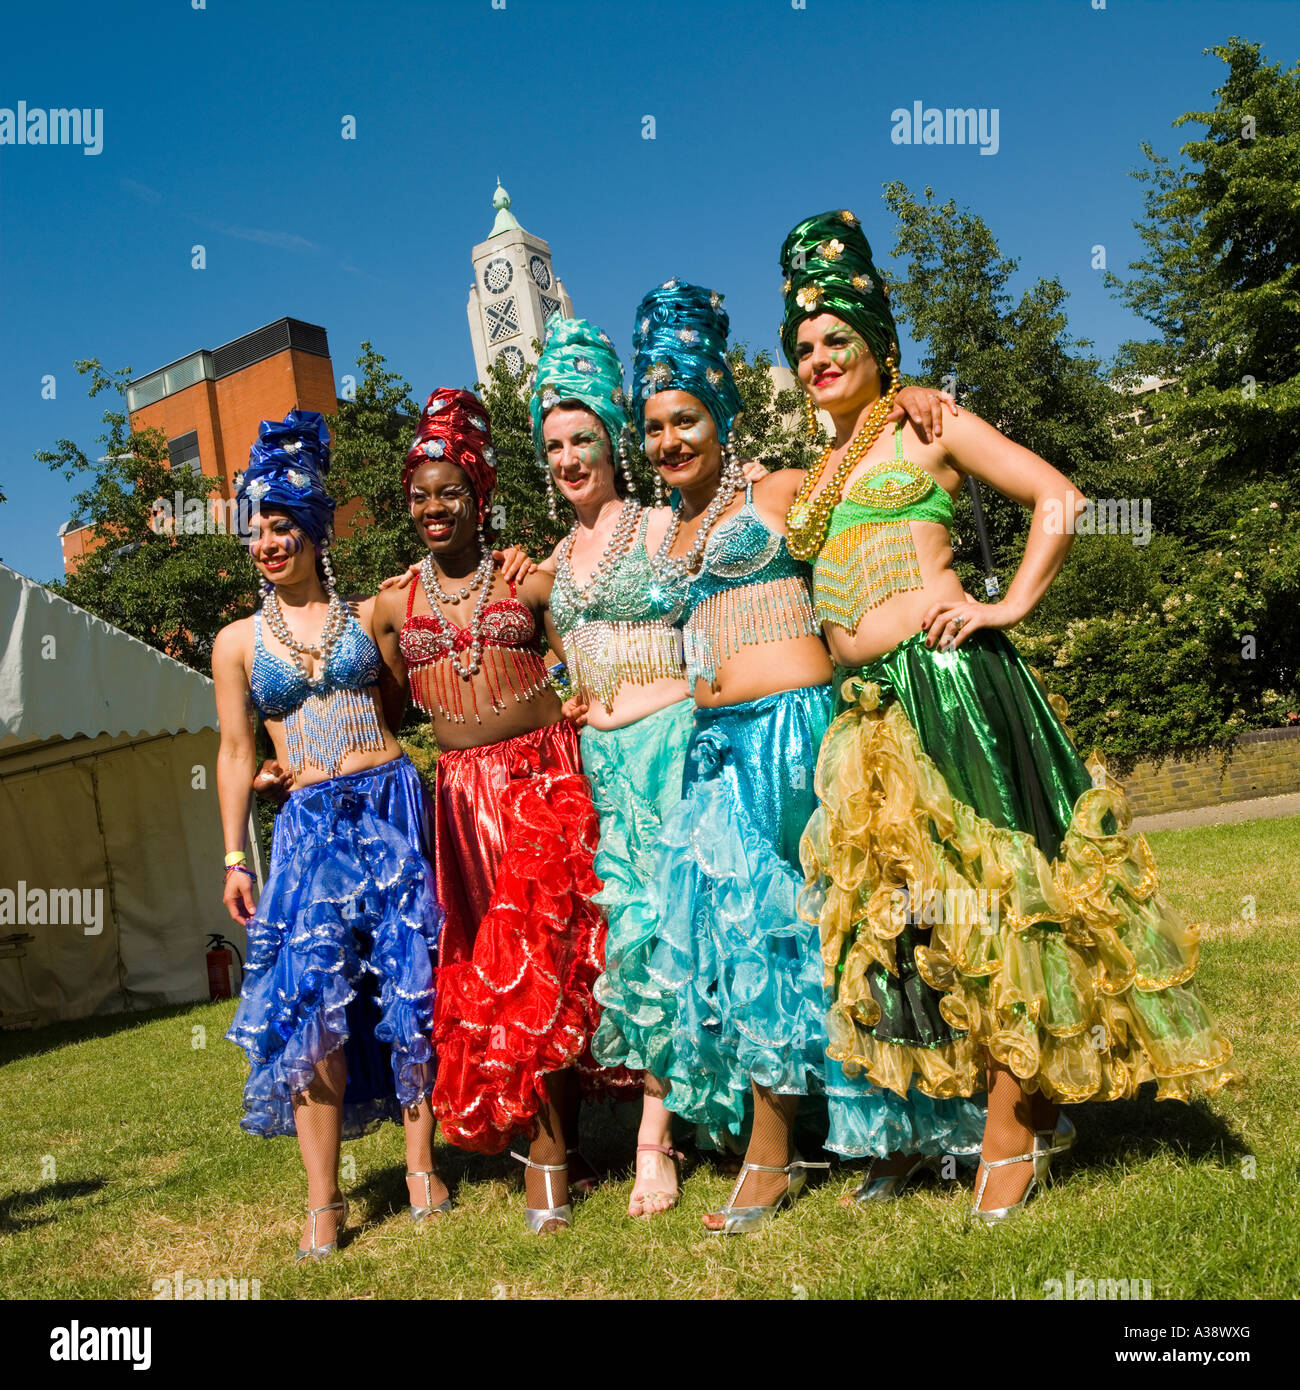 Five women dressed up in exoticline up  bright clothes for a street carnival South Bank Oxo Tower  London Stock Photo